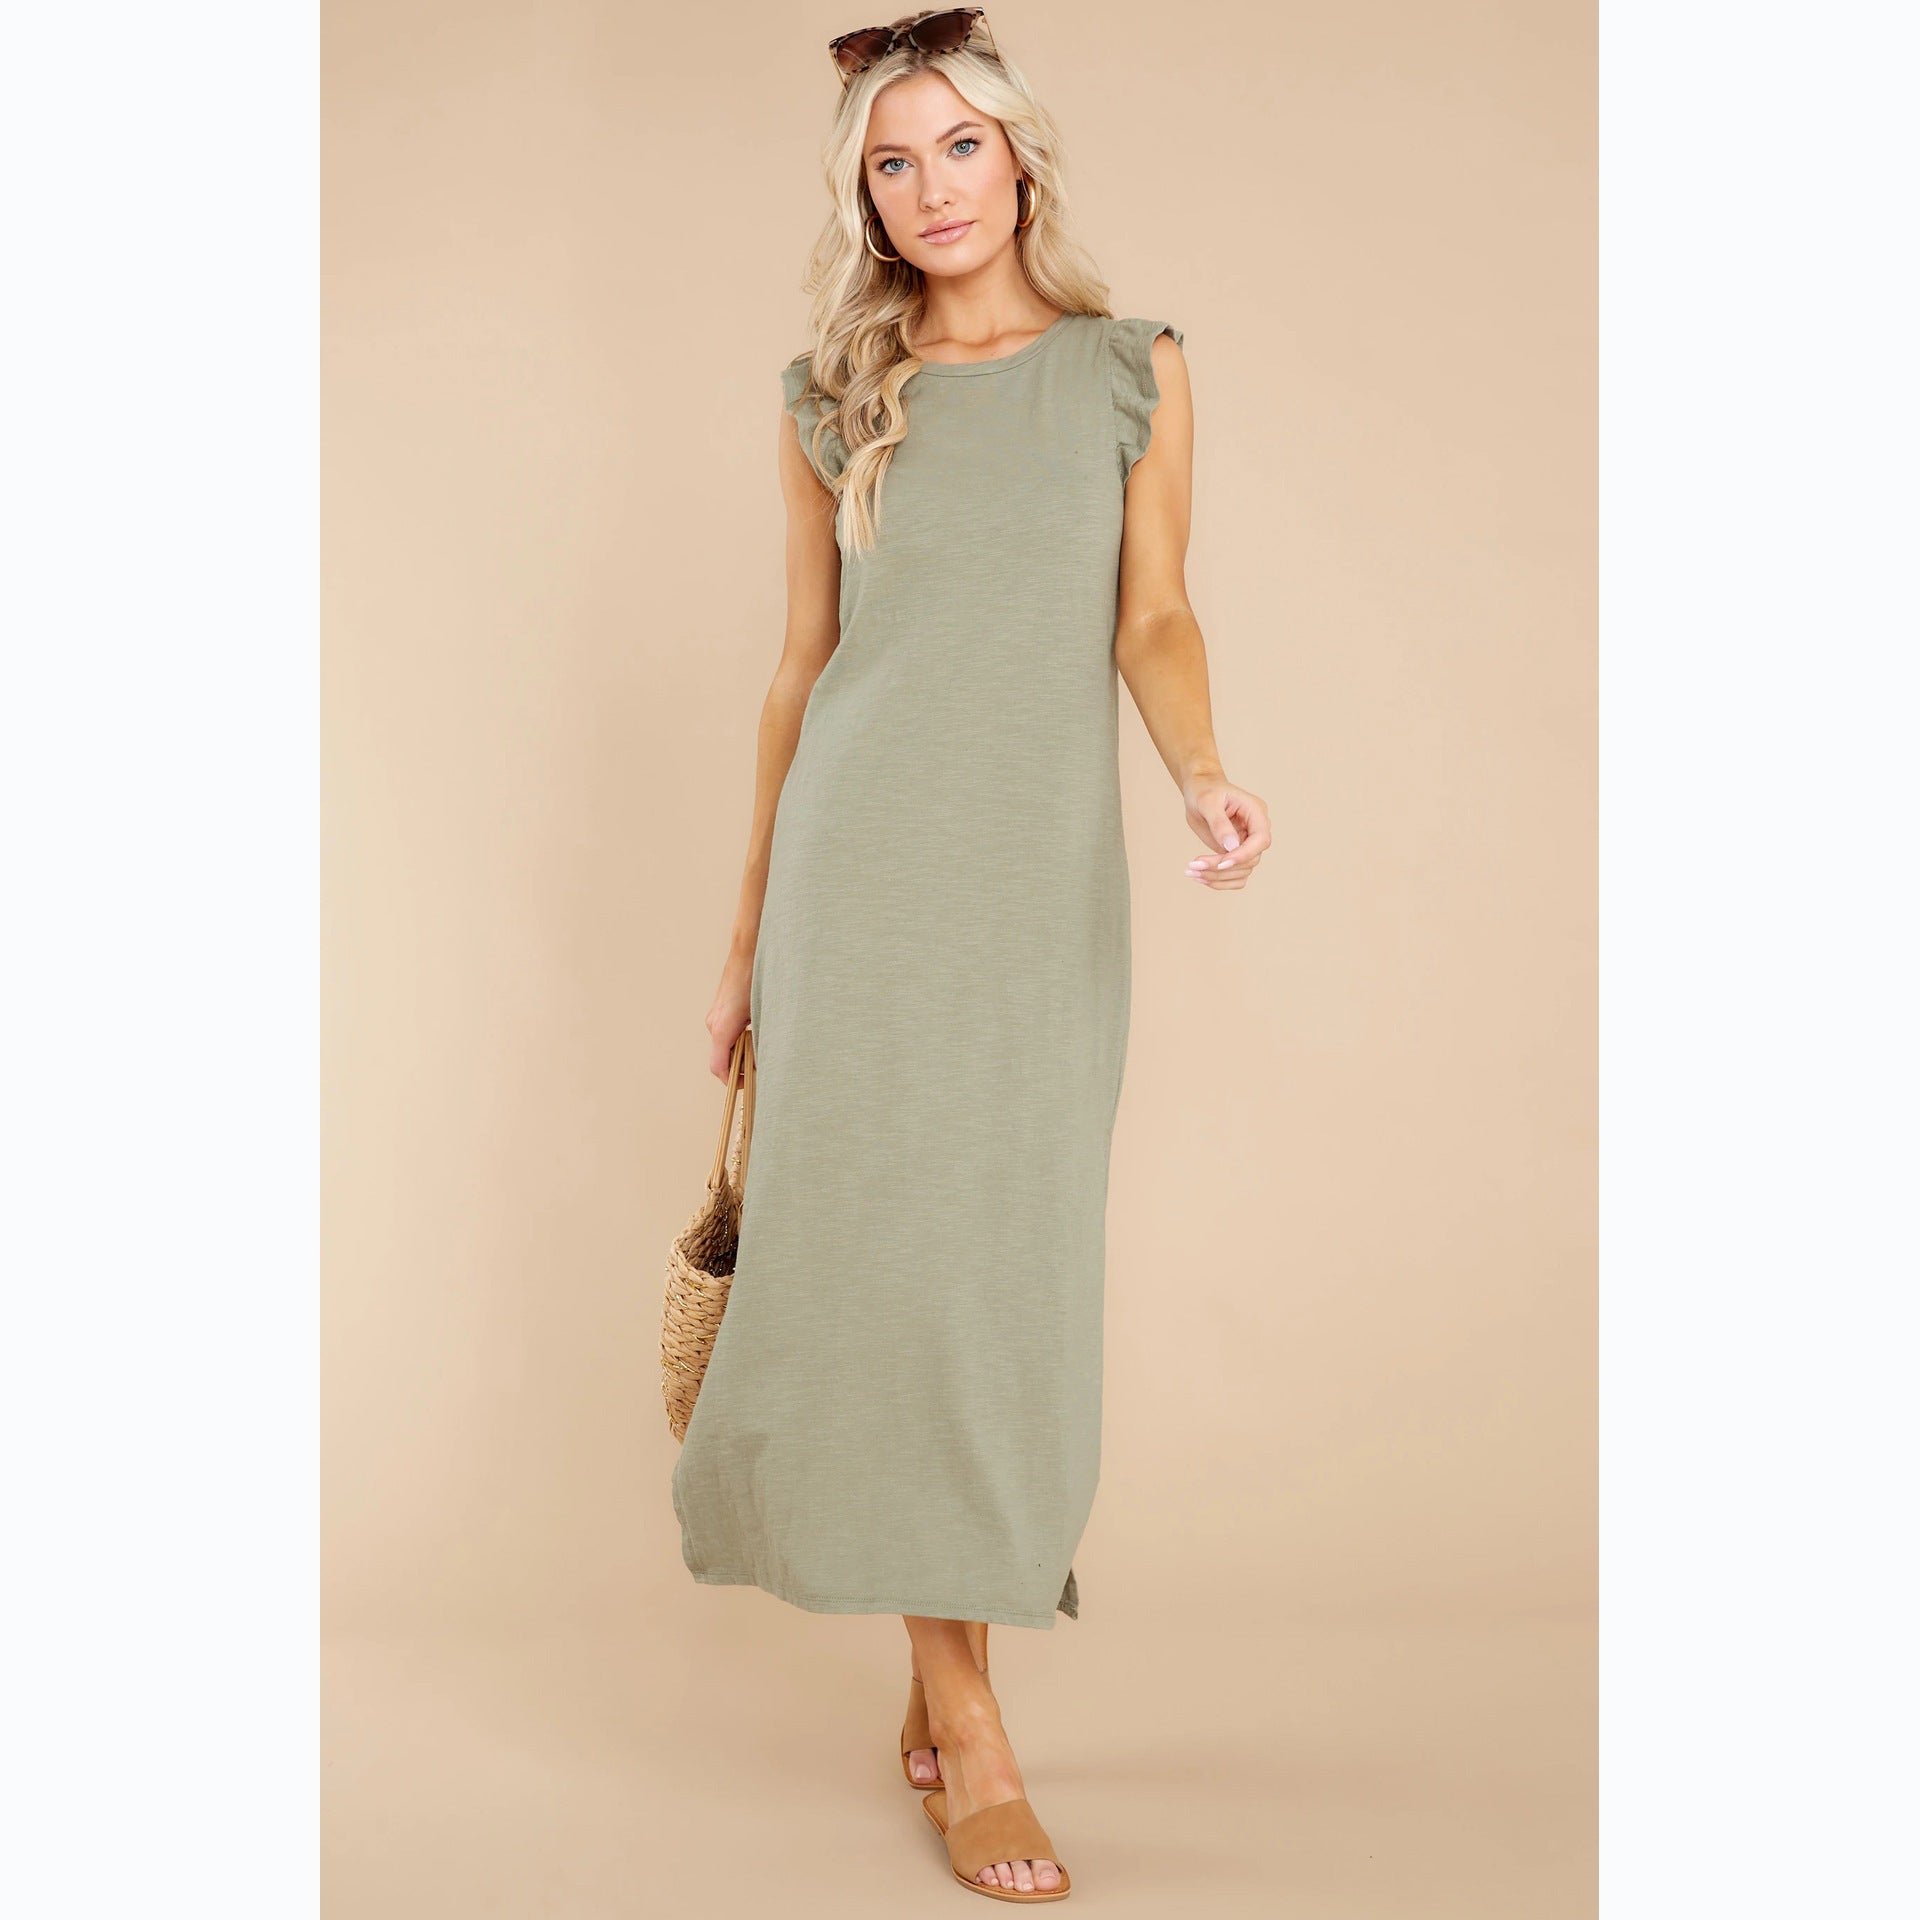 Casual Summer Wooden Ear A Line Trousers Knitted Dress